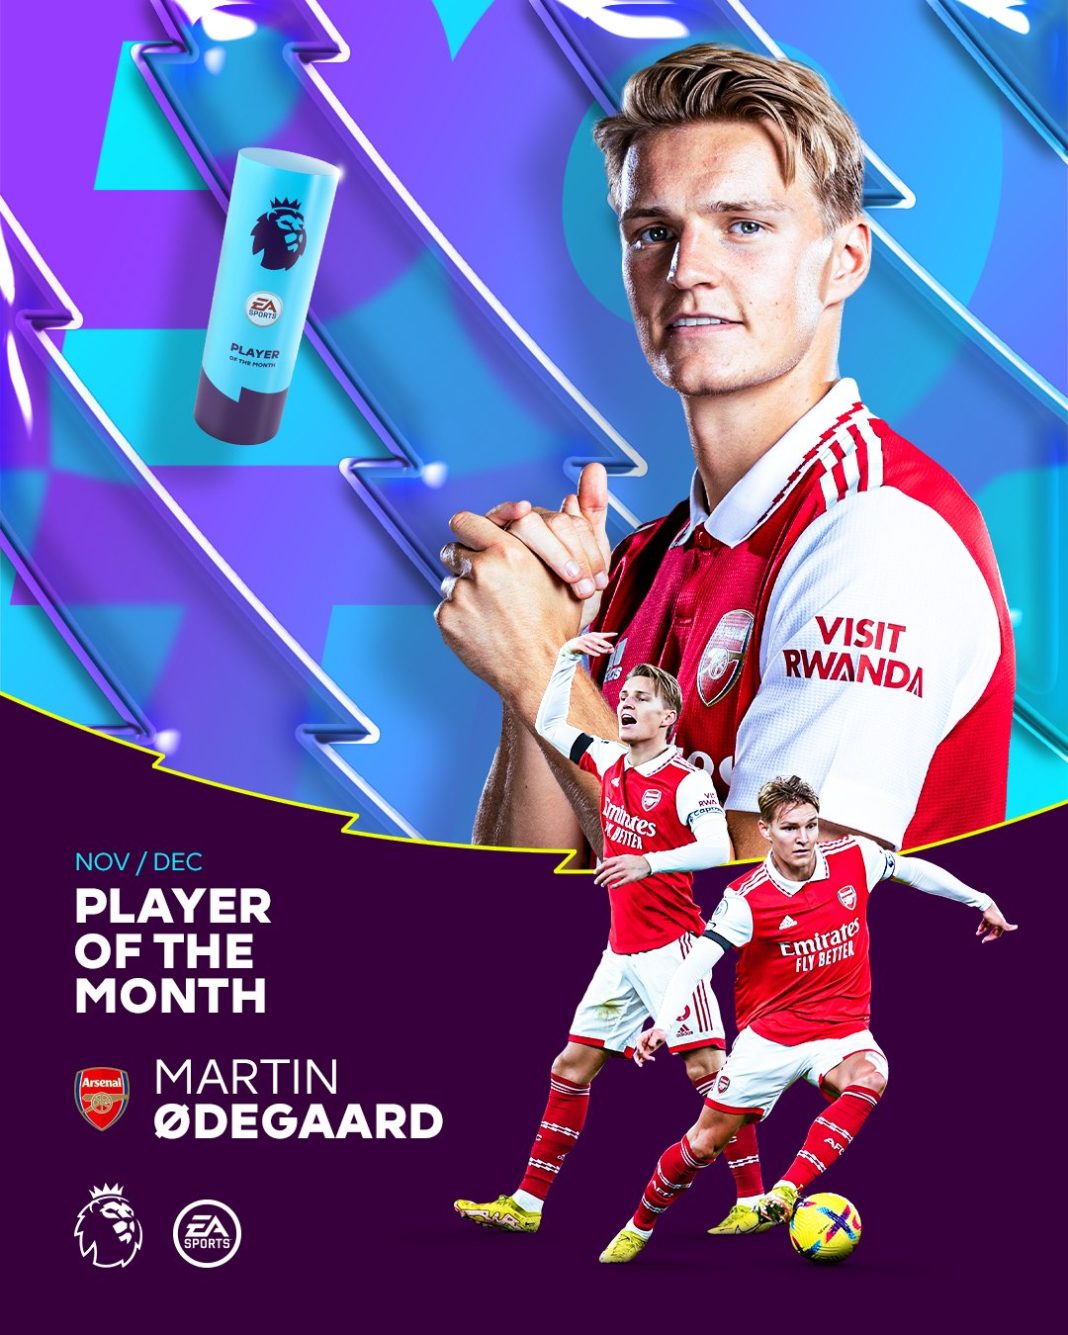 Martin Odegaard wins Player of the Month for November/December